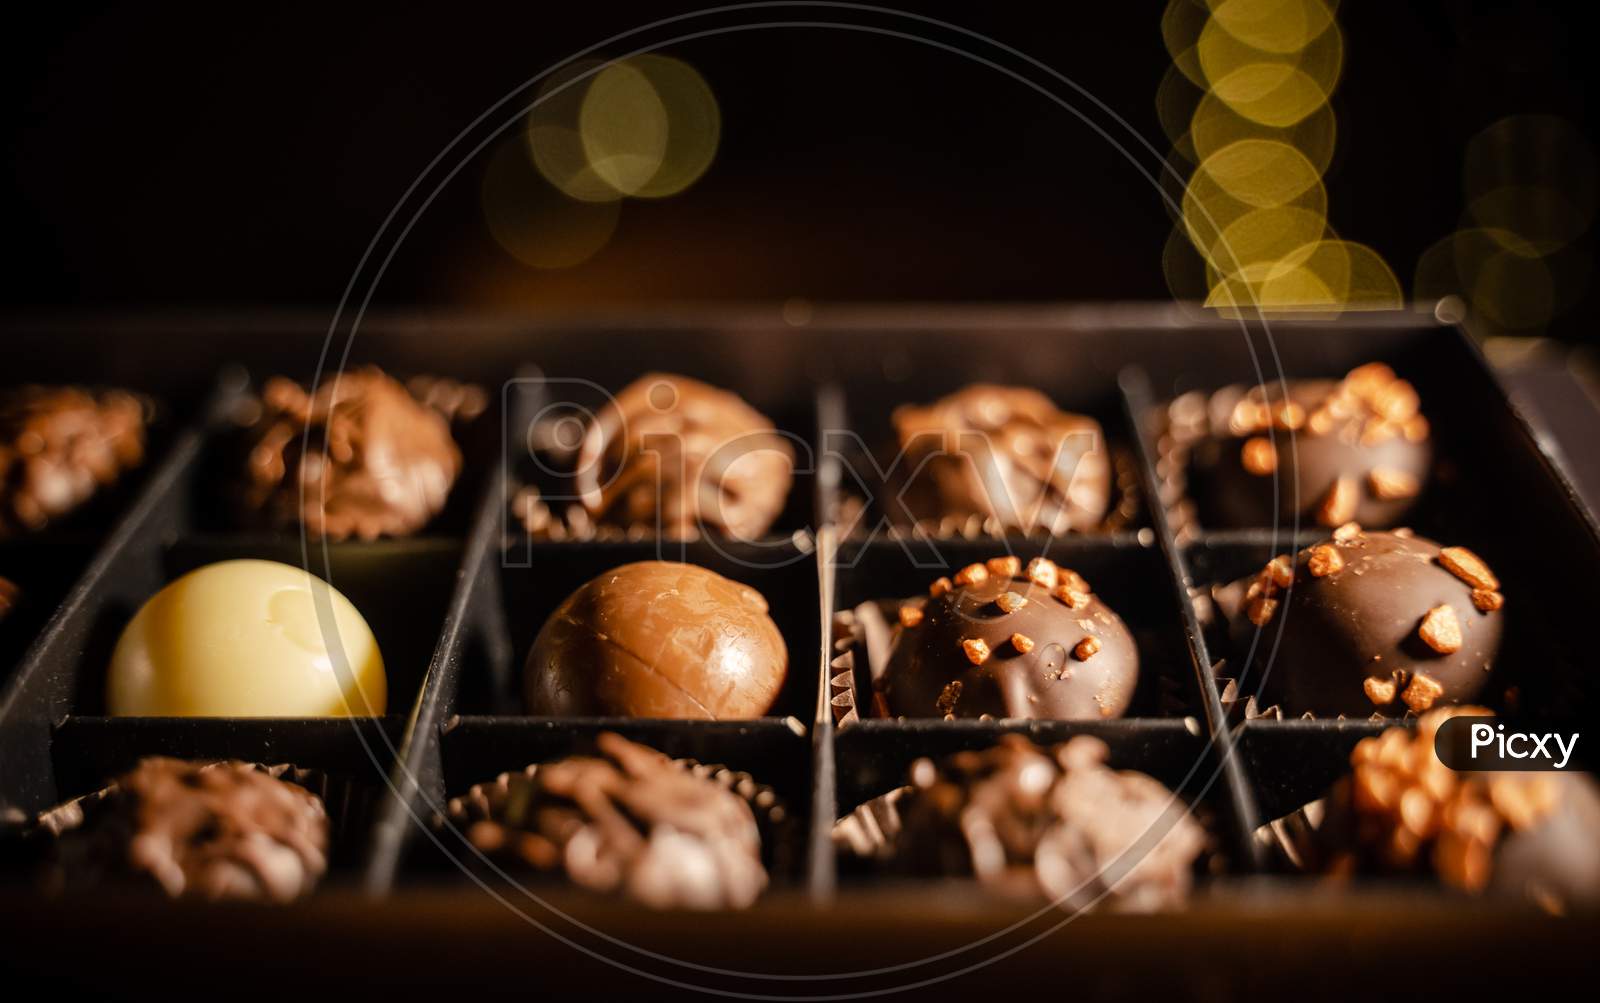 Delicious Chocolate Candies Or Truffle Balls In Box On Table Against Light Bokeh. Assorted Chocolate Pralines.An Assortment Of Fine Chocolates In White, Dark, And Milk Chocolate With Nuts.